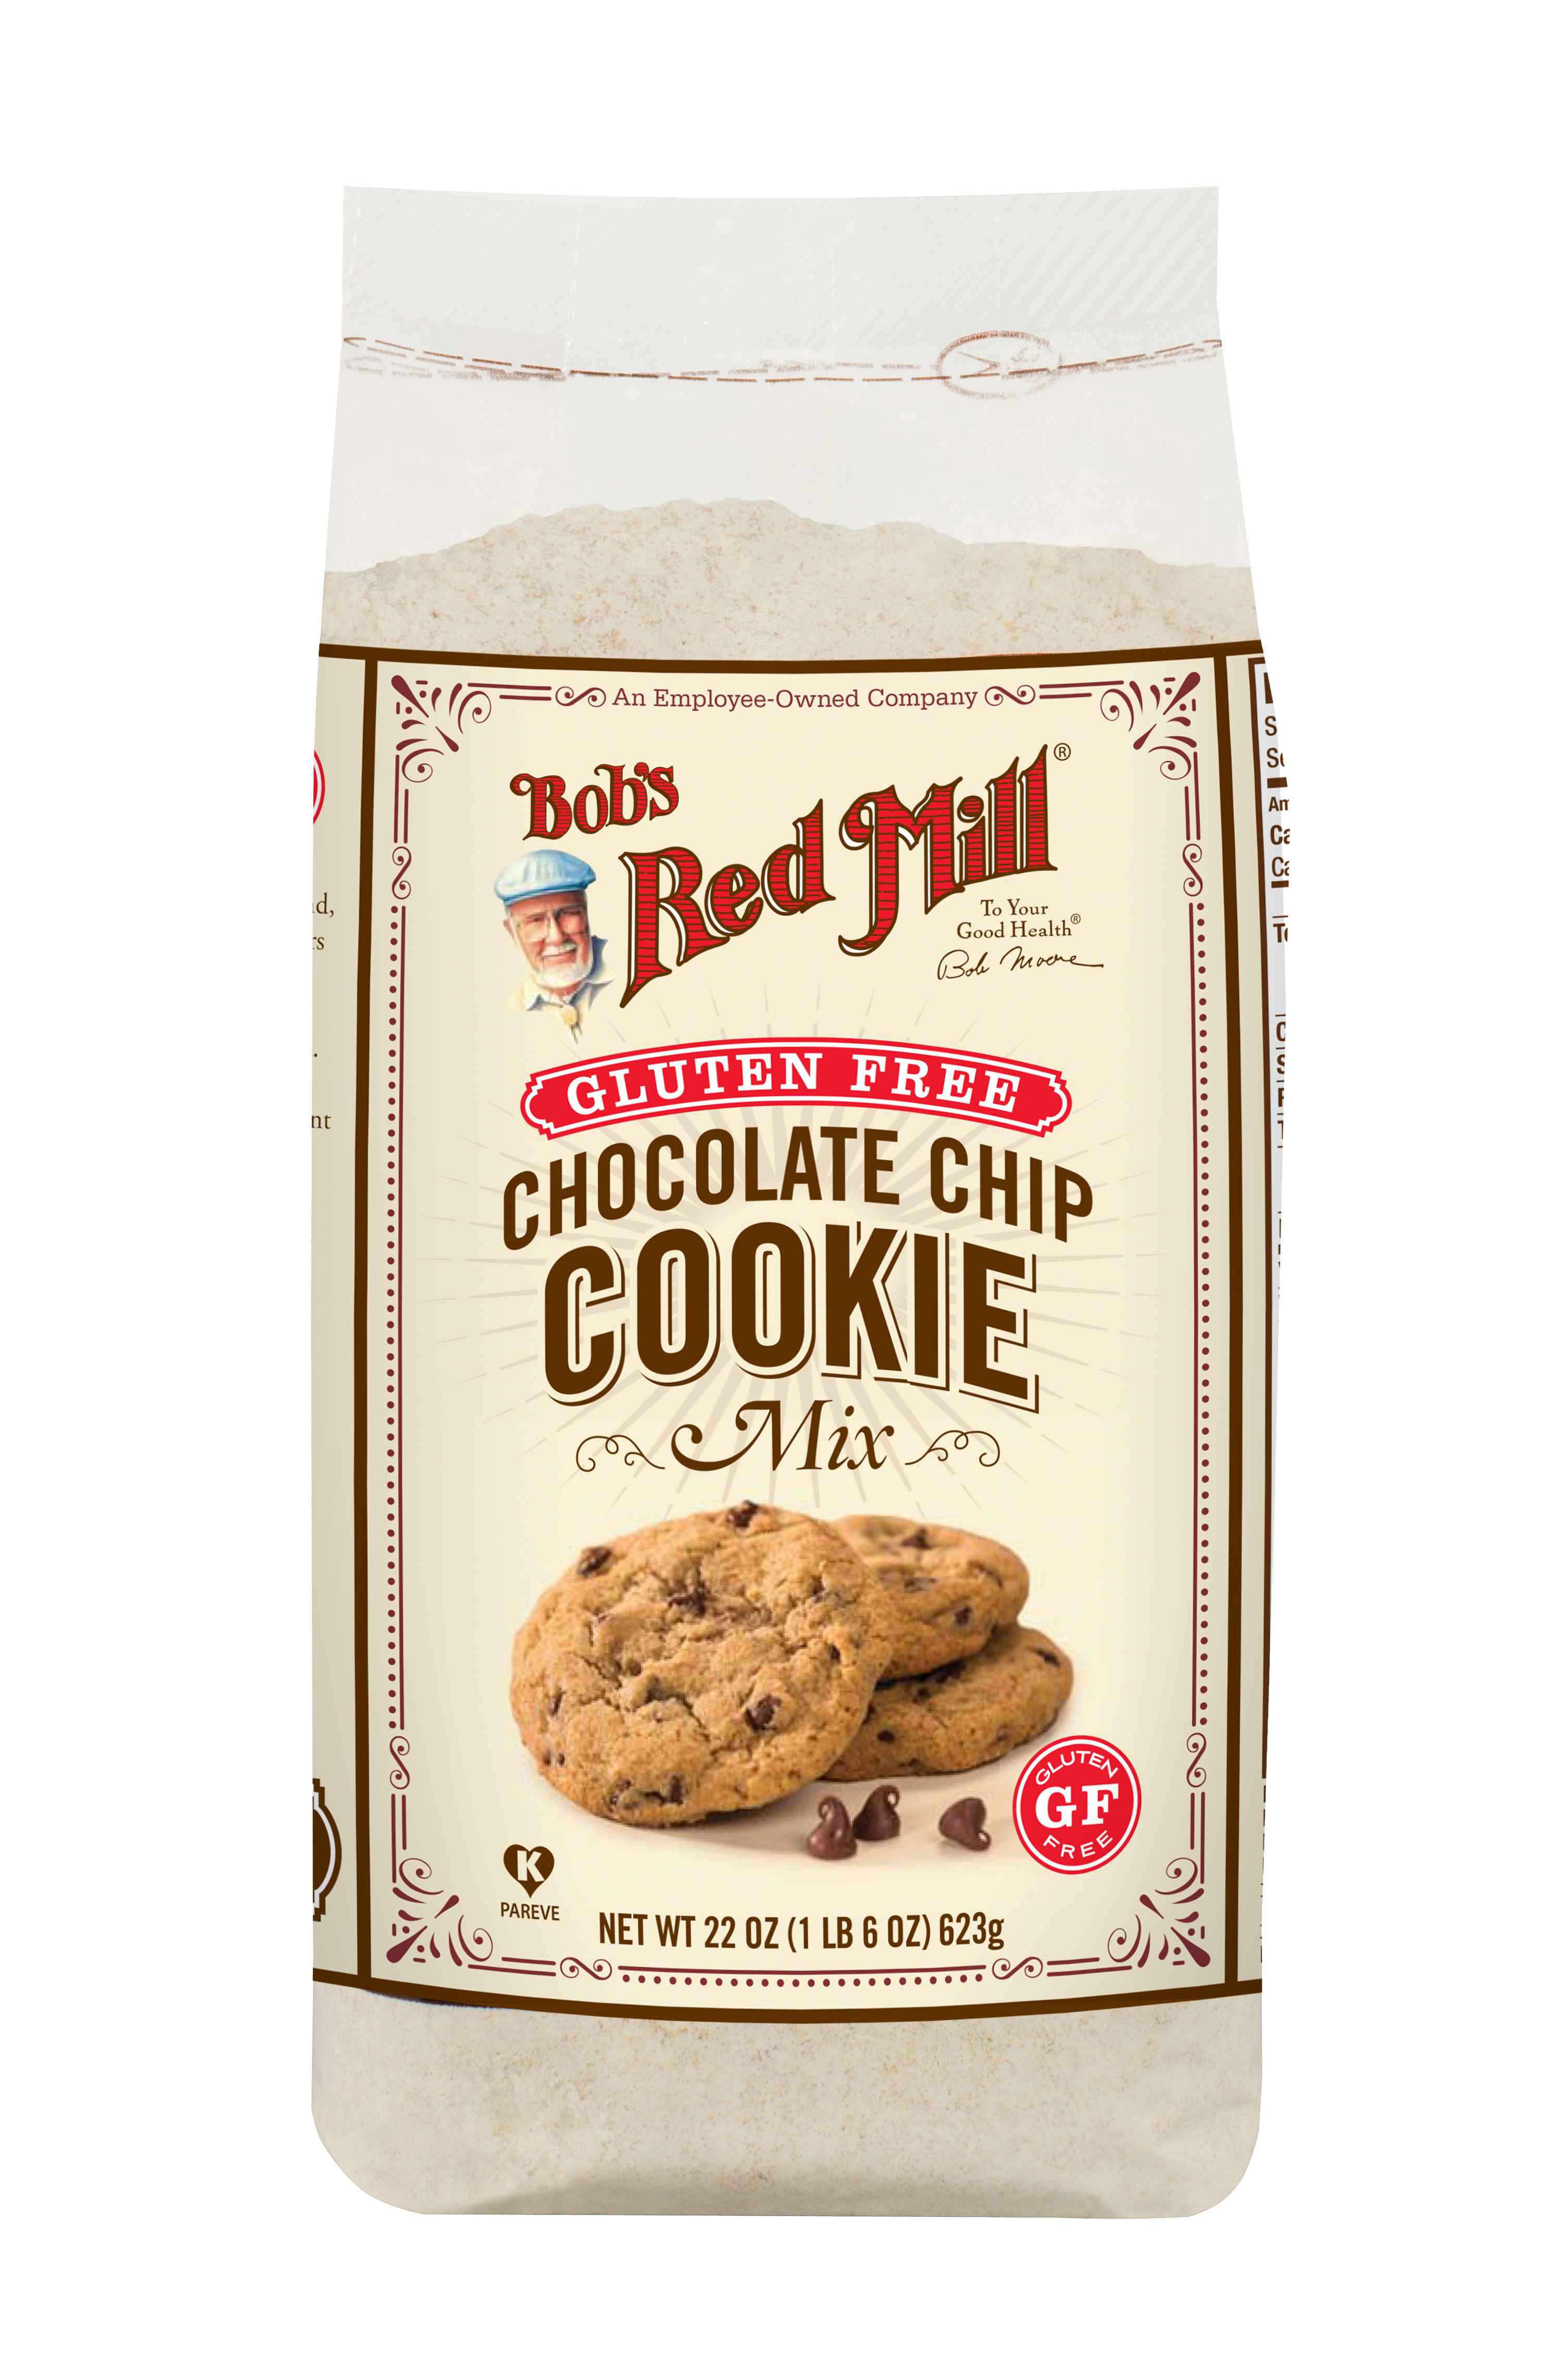 Bob'S Red Mill Gluten Free Oatmeal Chocolate Chip Cookies
 Basic Preparation Instructions for Gluten Free Chocolate